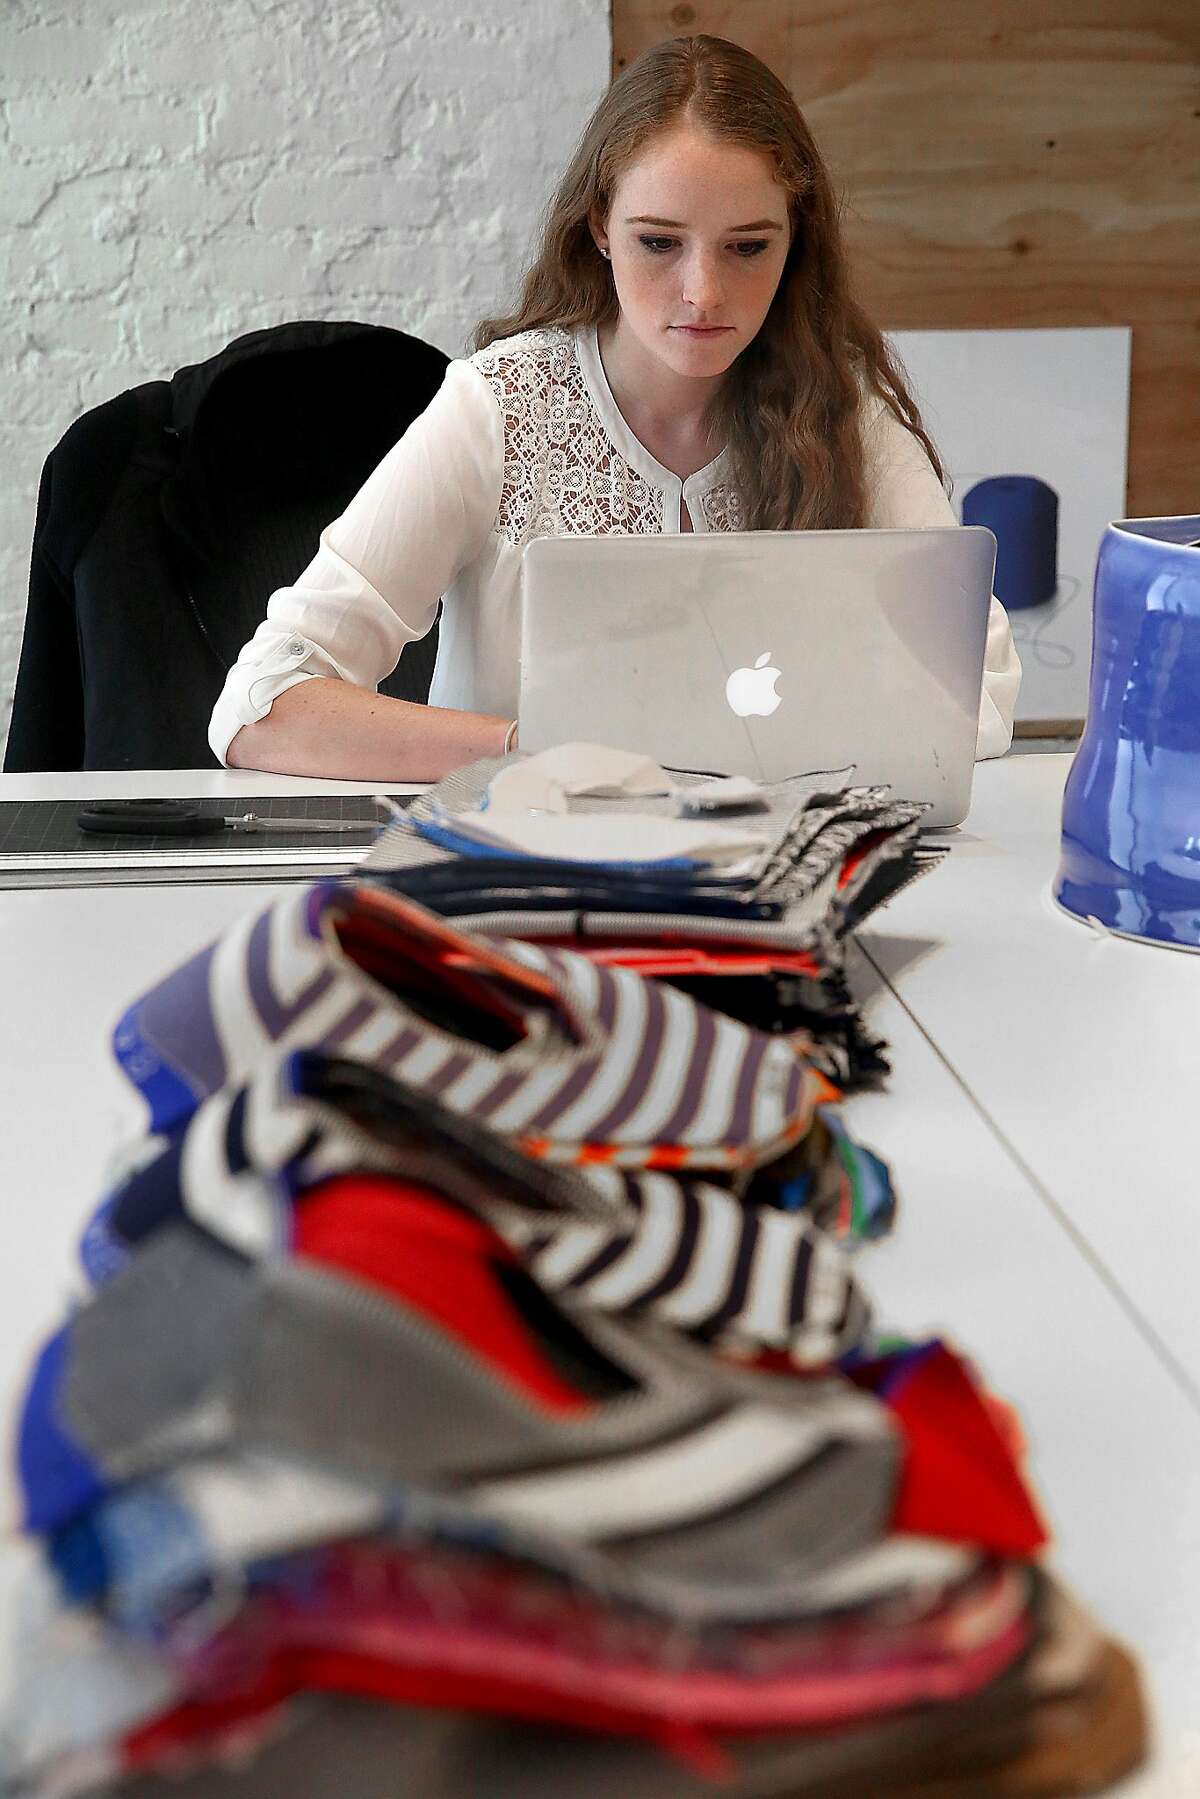 Graphic designer Ashlee Rice works at Rothy's, a female shoe brand, on Thursday, July 28, 2016, in San Francisco, Calif.